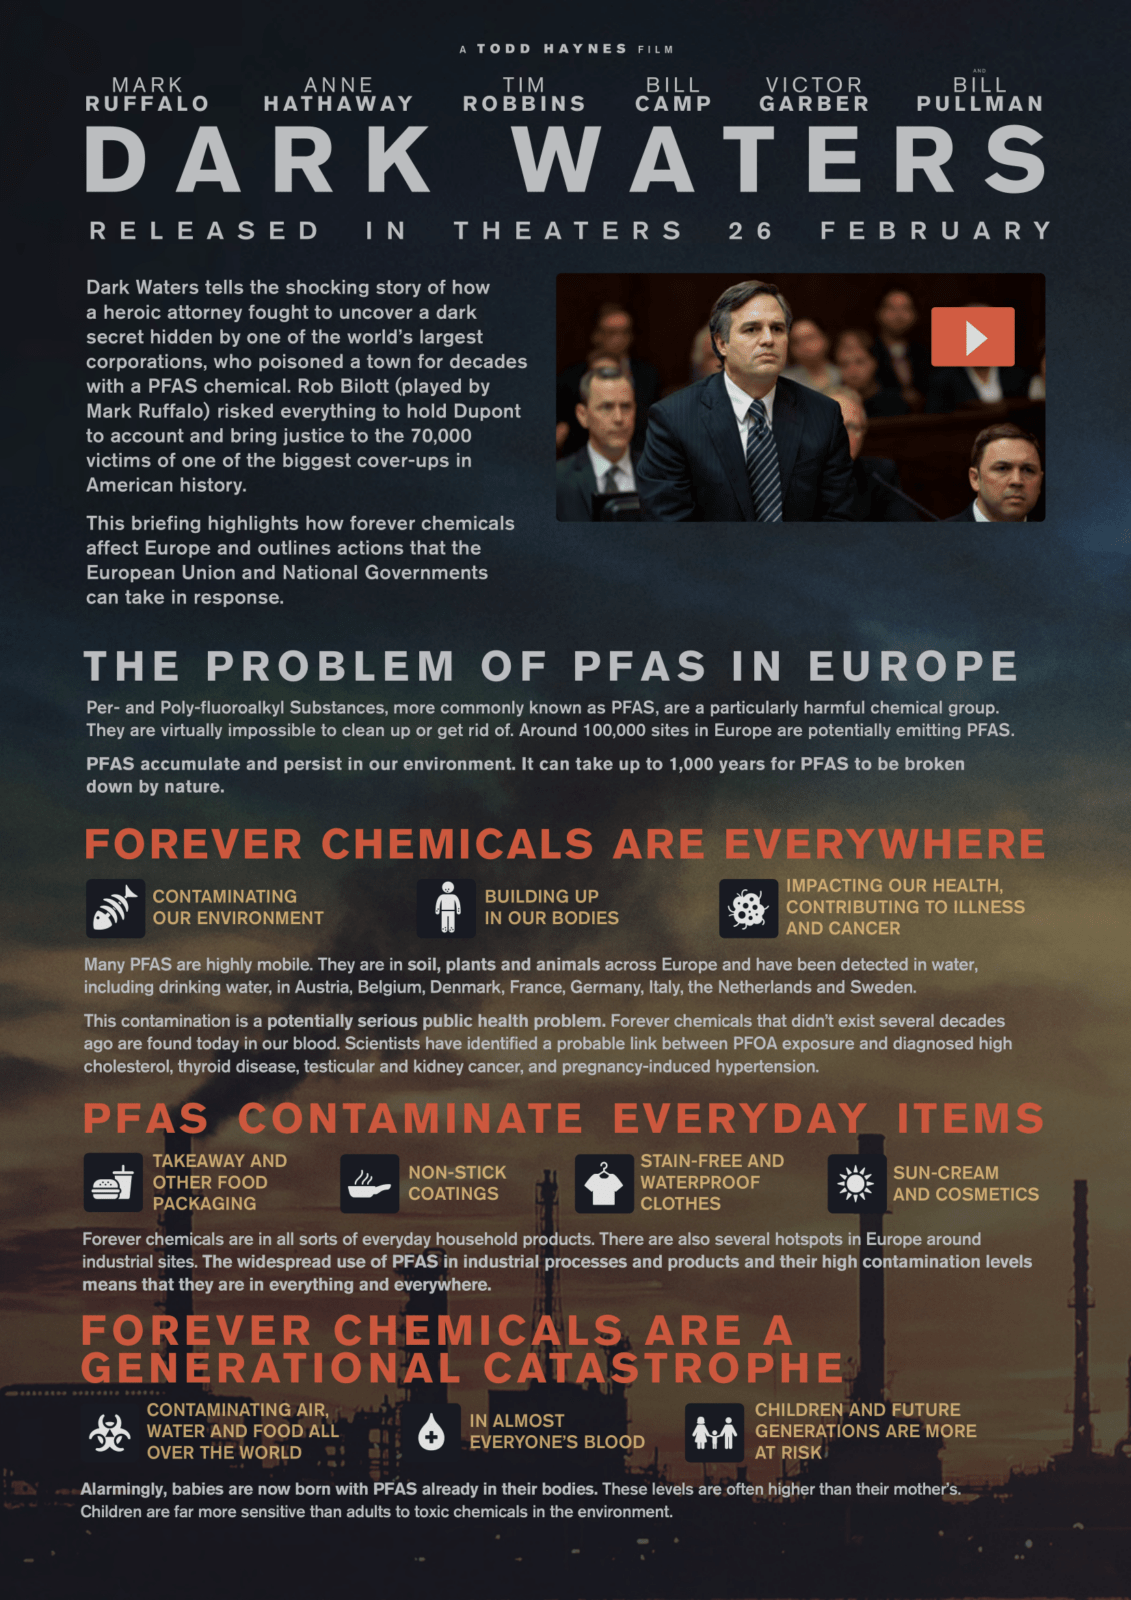 The problem of PFAS in Europe – joint NGO flyer